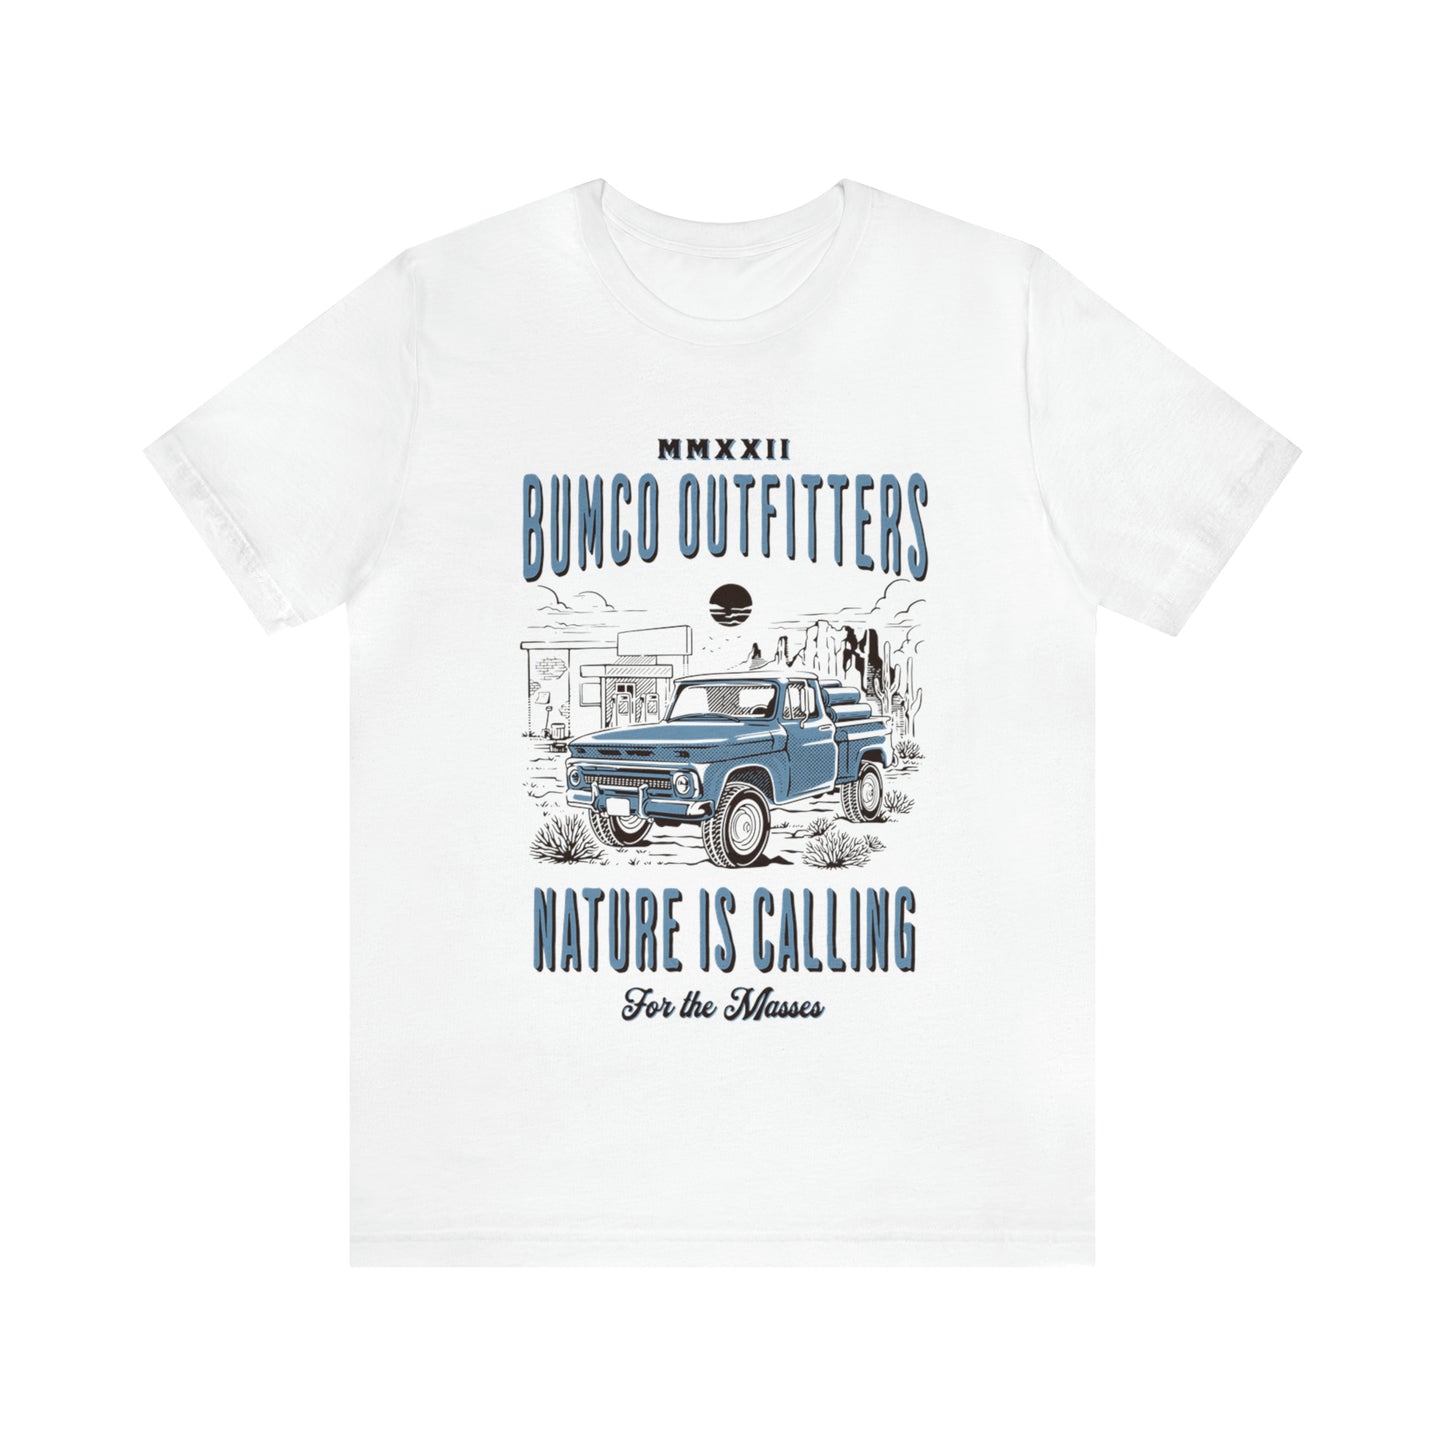 Nature is Calling - T-Shirt